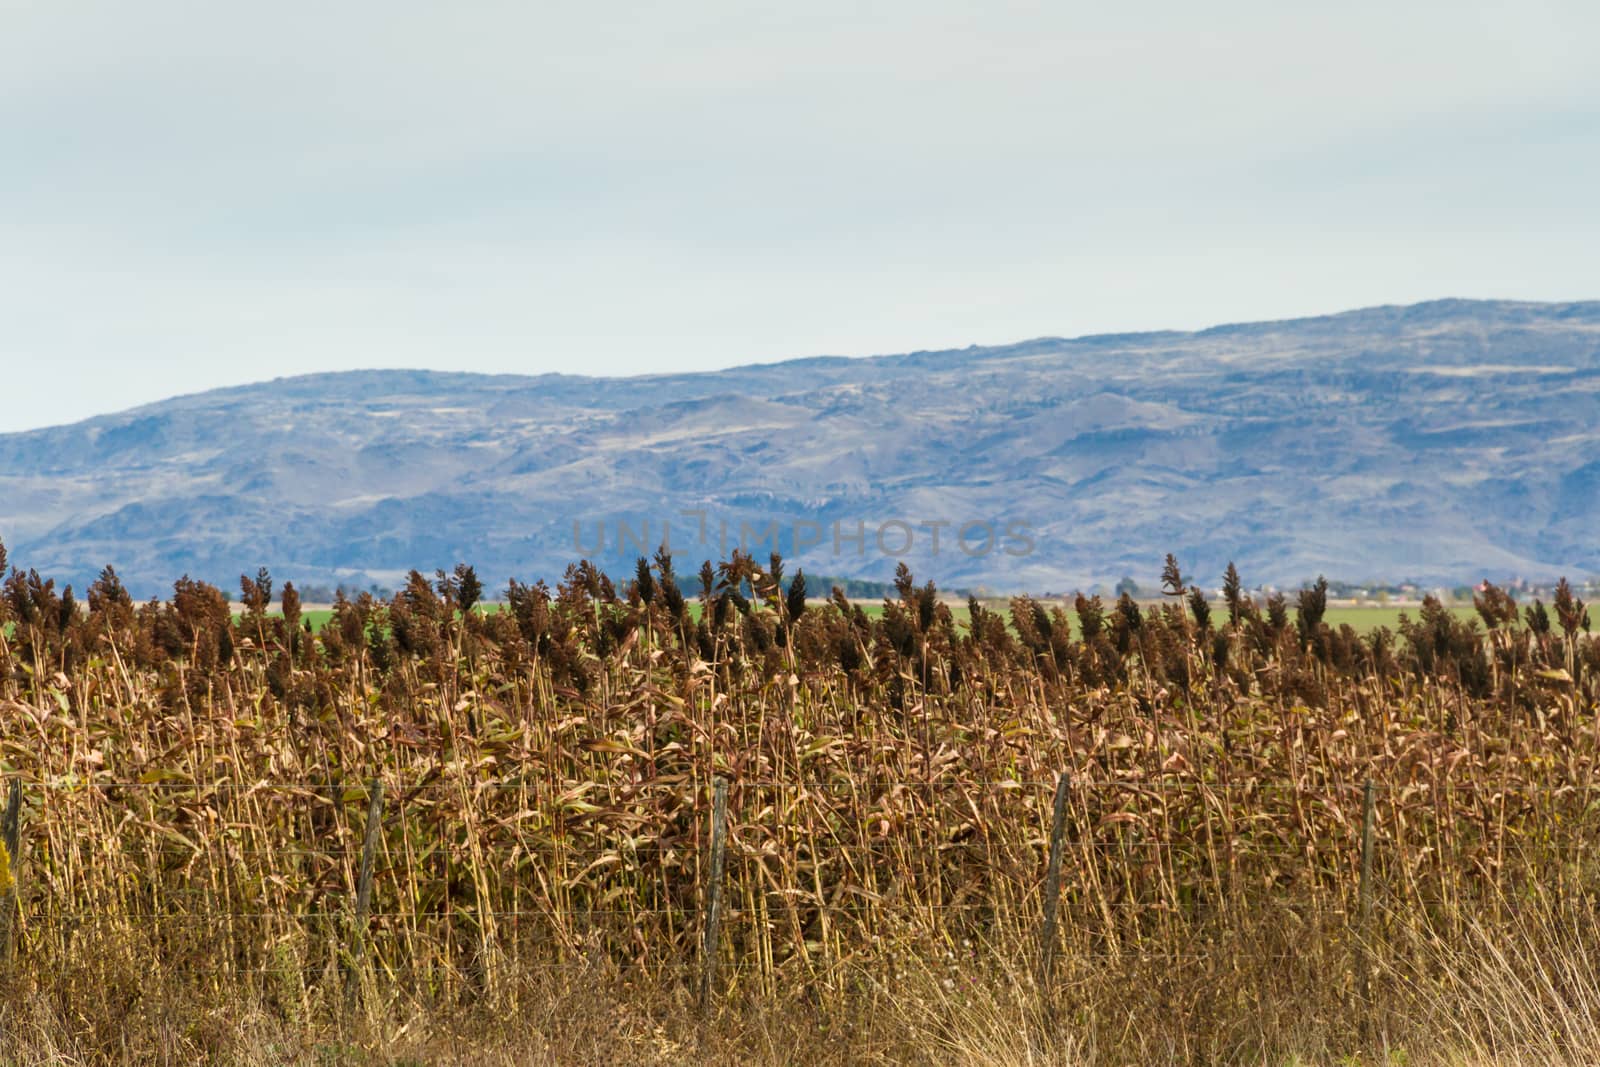 plantation of sorghum in the foothills of the mountains